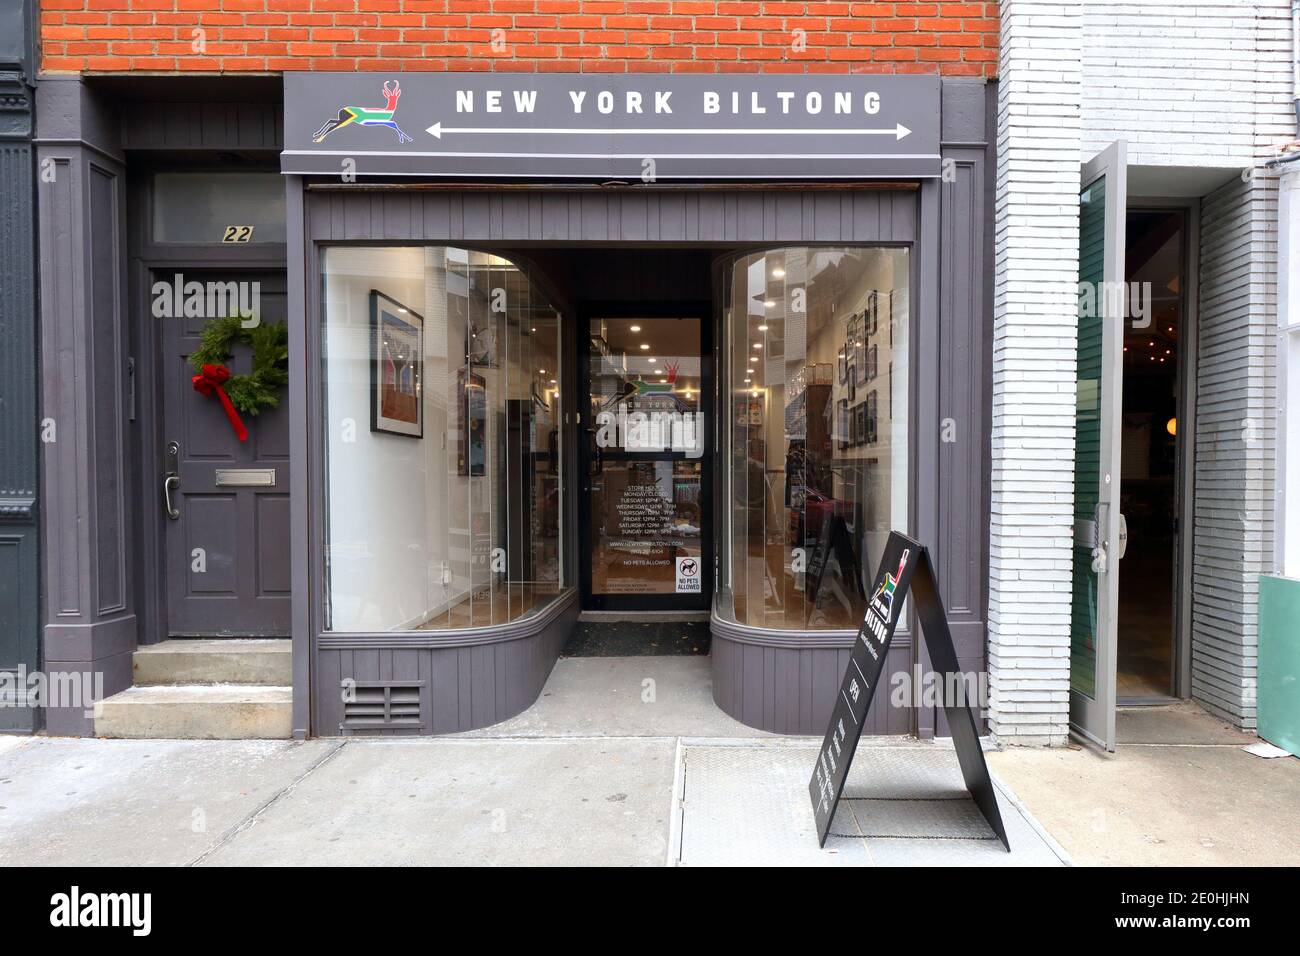 []historical storefront] New York Biltong, 22 Greenwich Ave, NYC storefront photo of a South African grocery store in Manhattan's Greenwich Village. Stock Photo